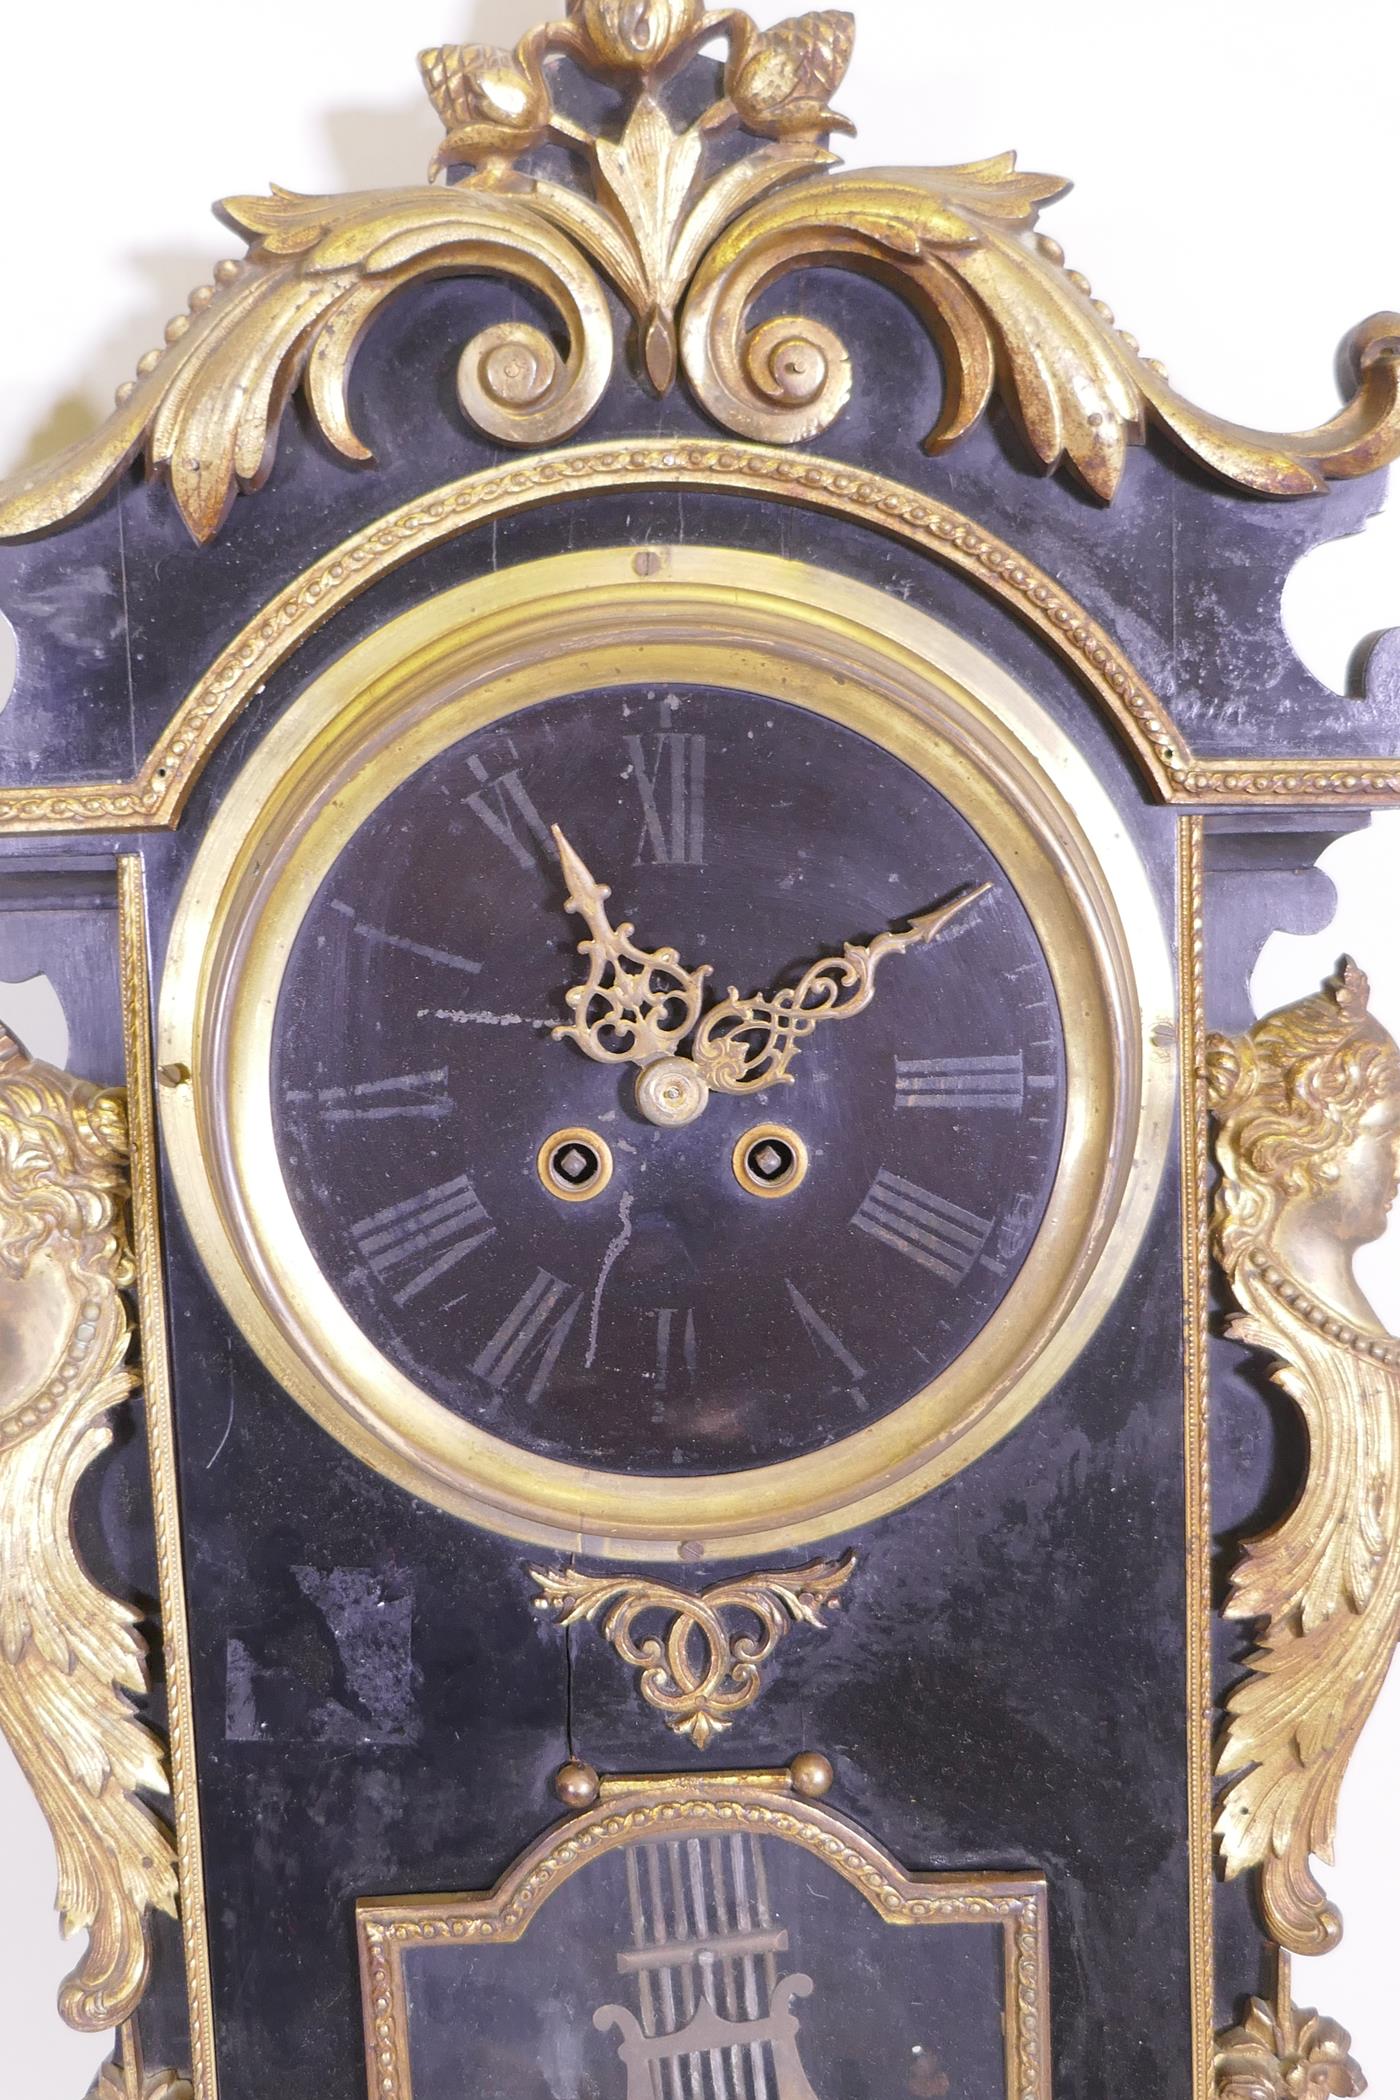 An antique ormolu and ebonised wood cased wall clock and barometer, the spring driven movement - Image 2 of 4